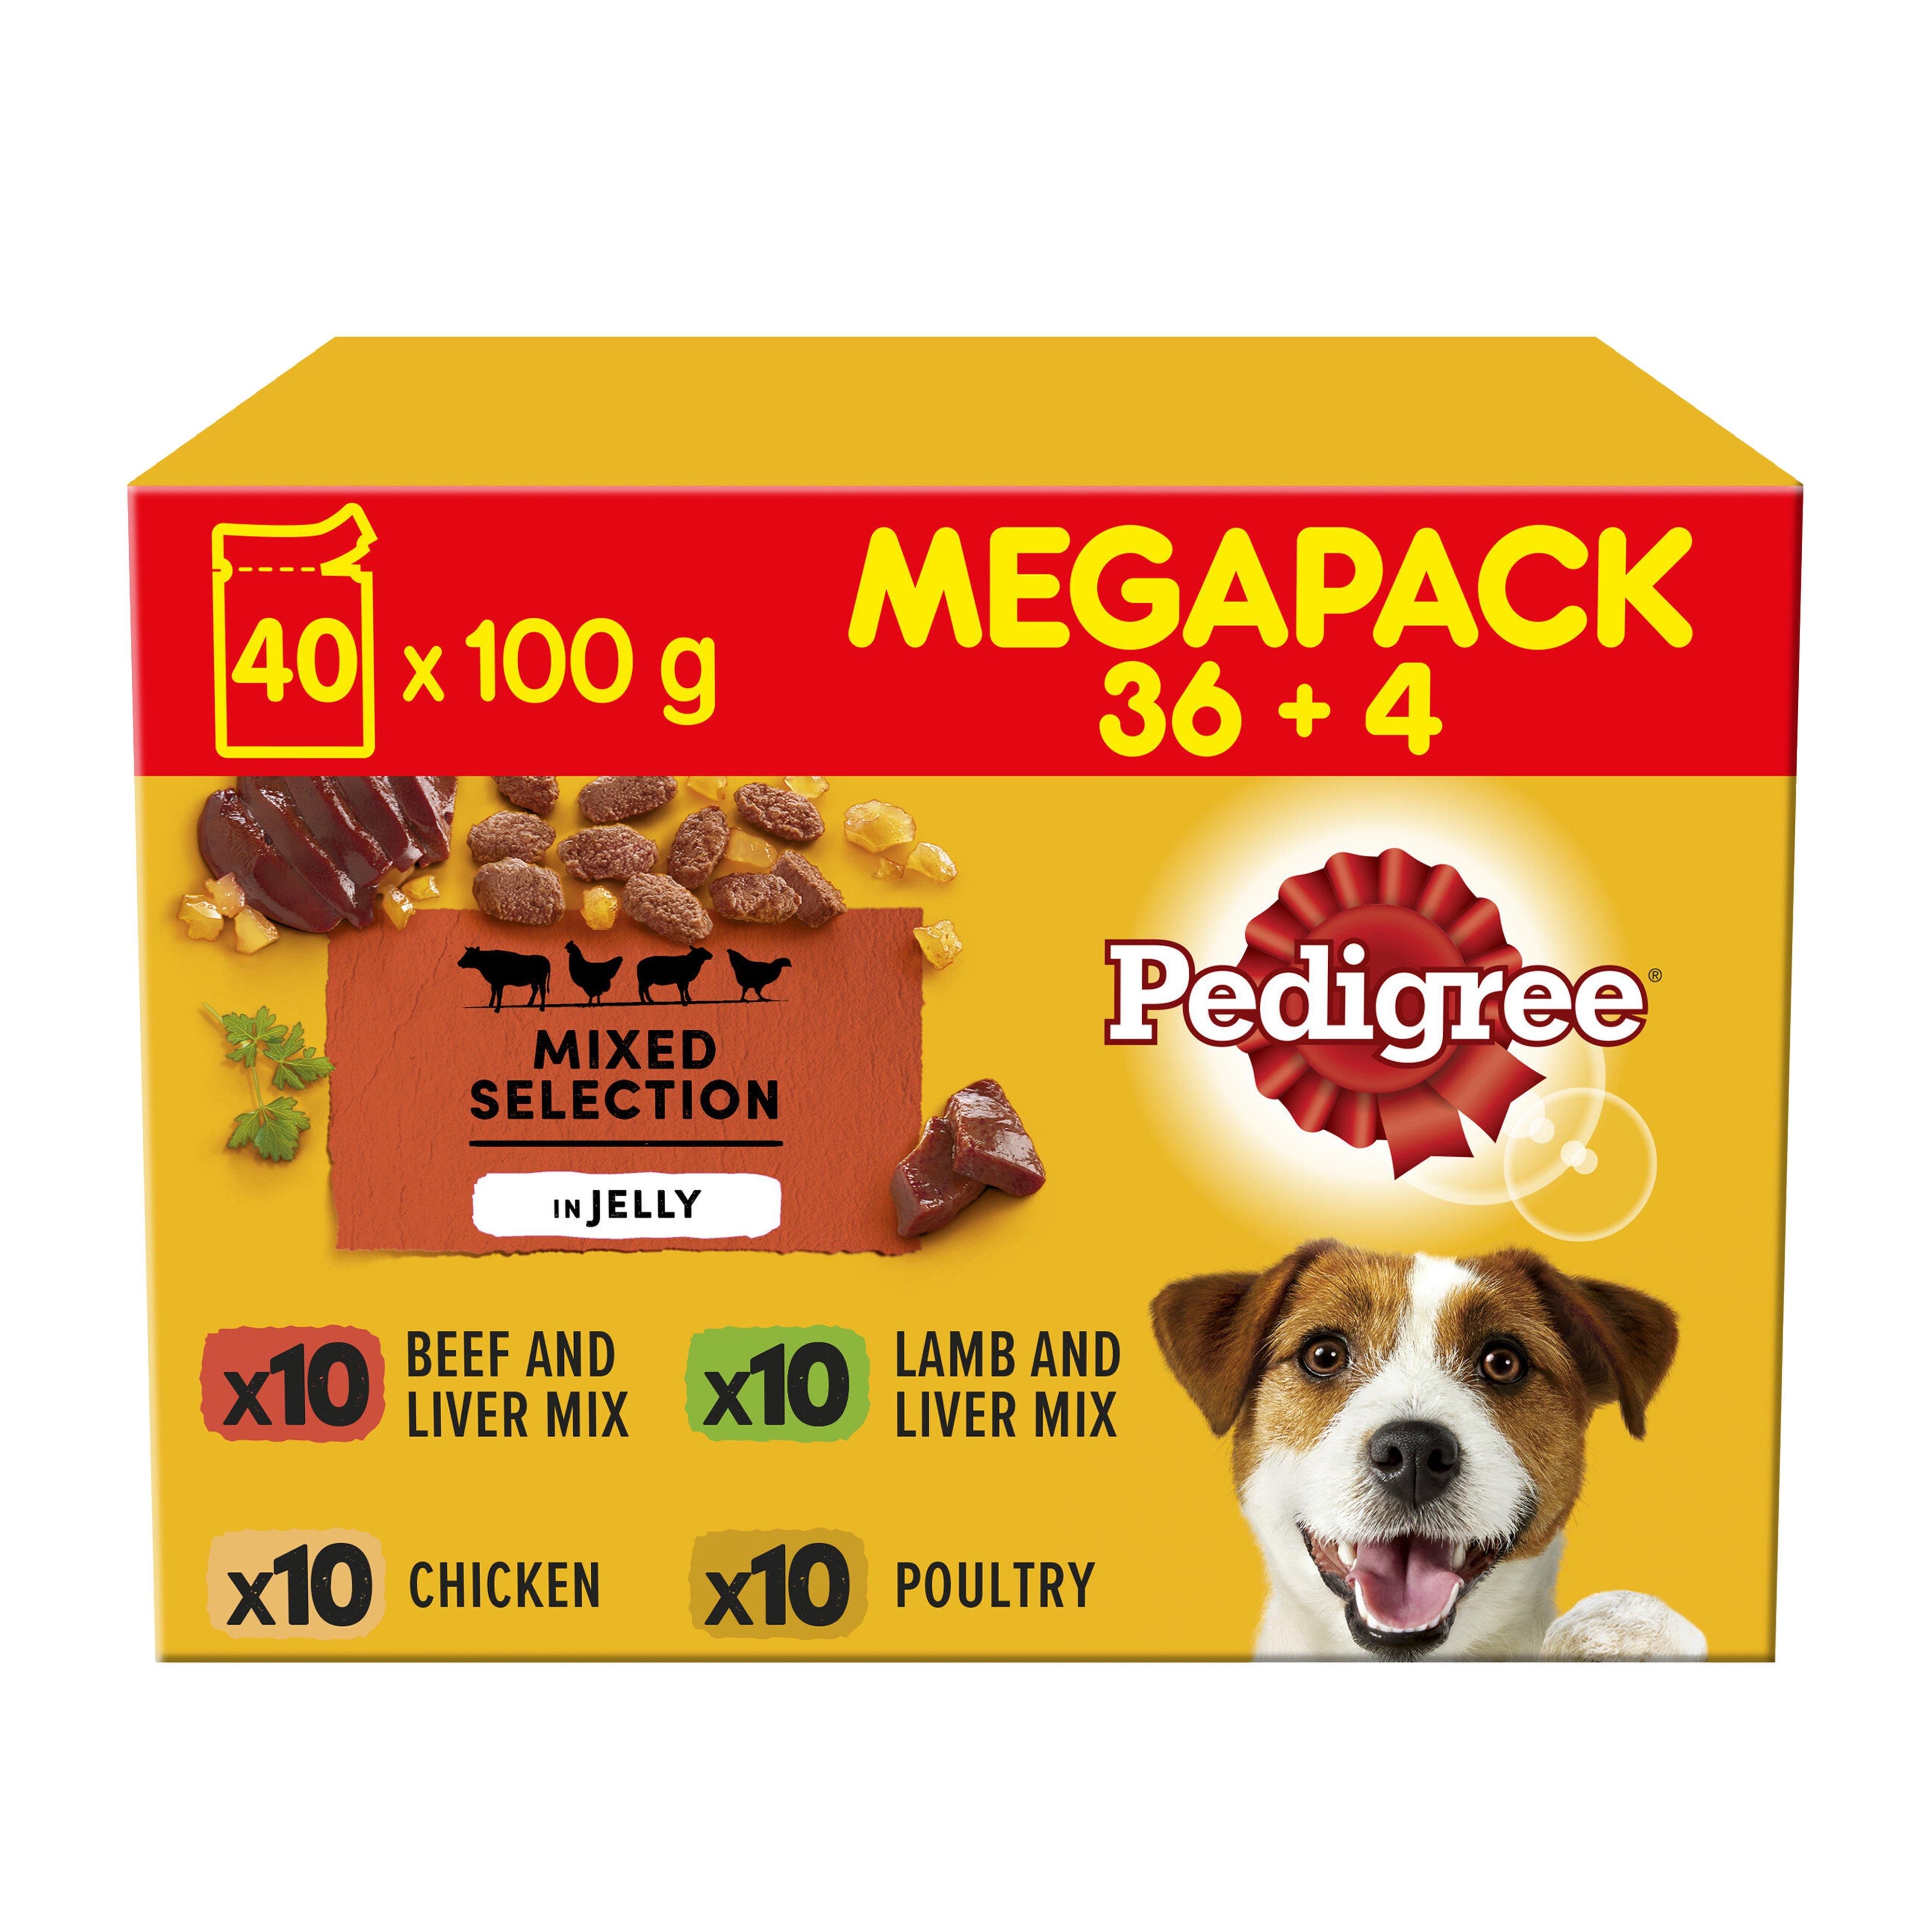 Adult Dog Mixed Selection in Jelly 100g x 40 for 36pk